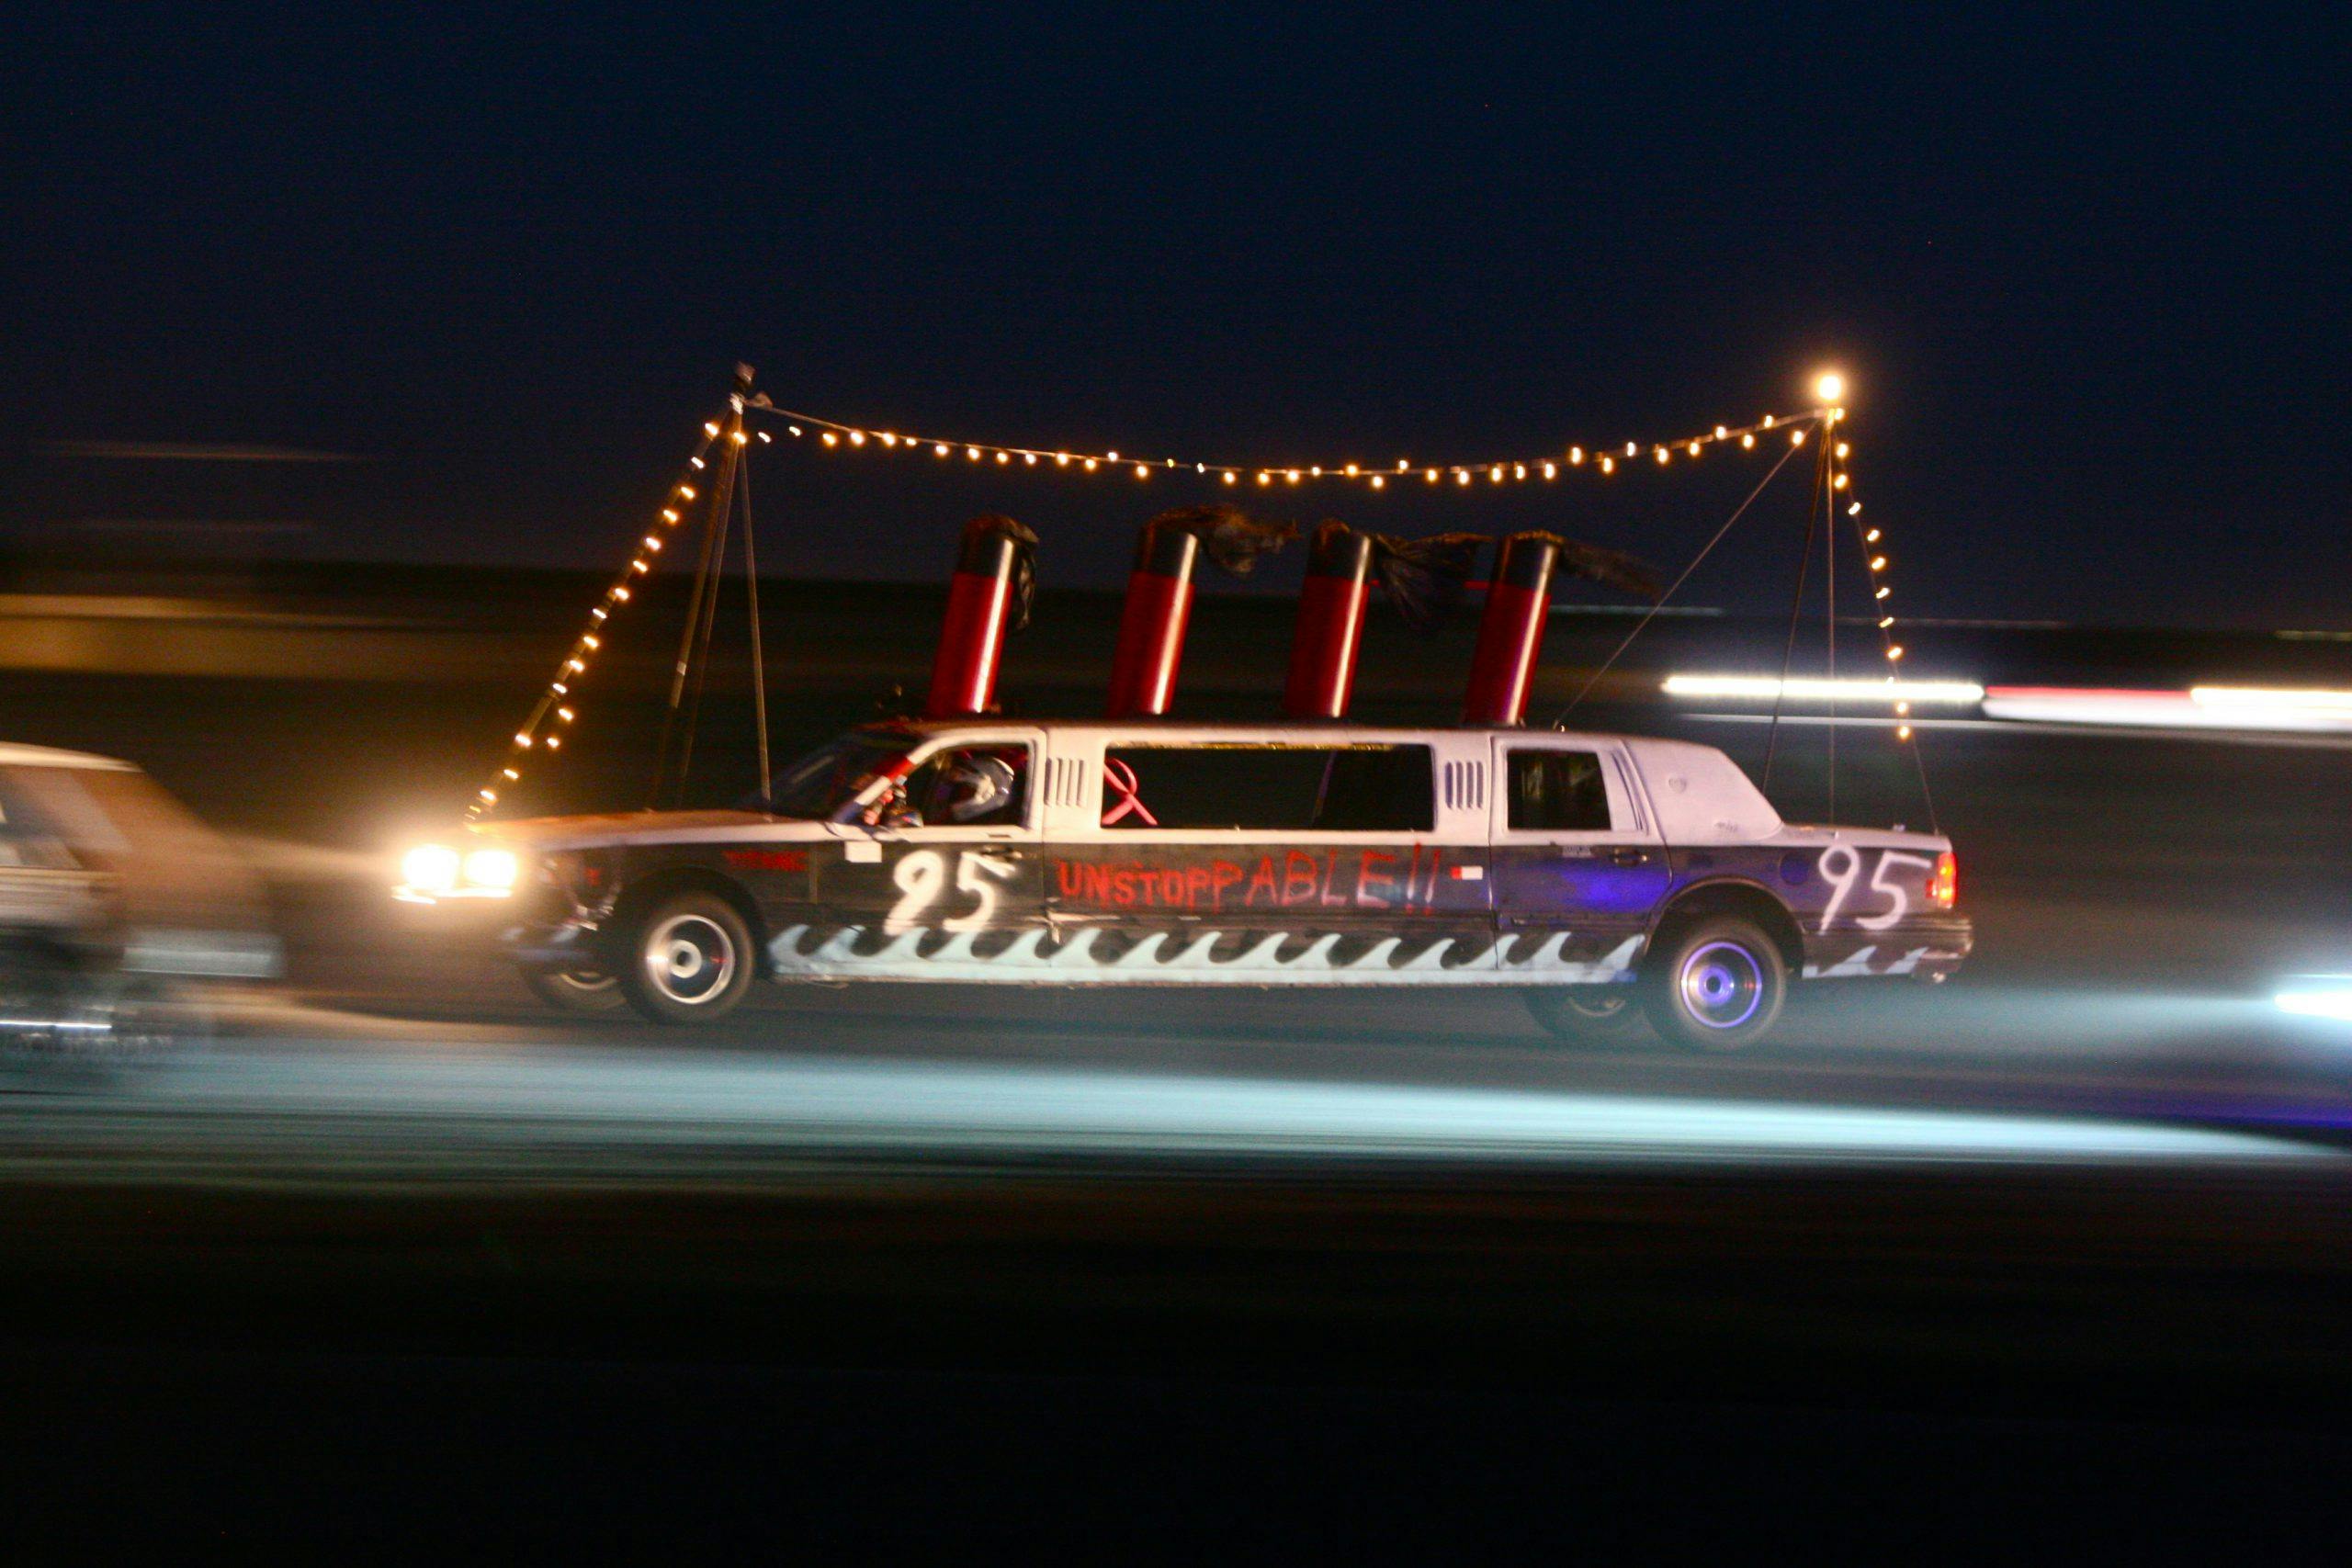 Limousine decorated as a boat races in the 24 Hours of Lemons